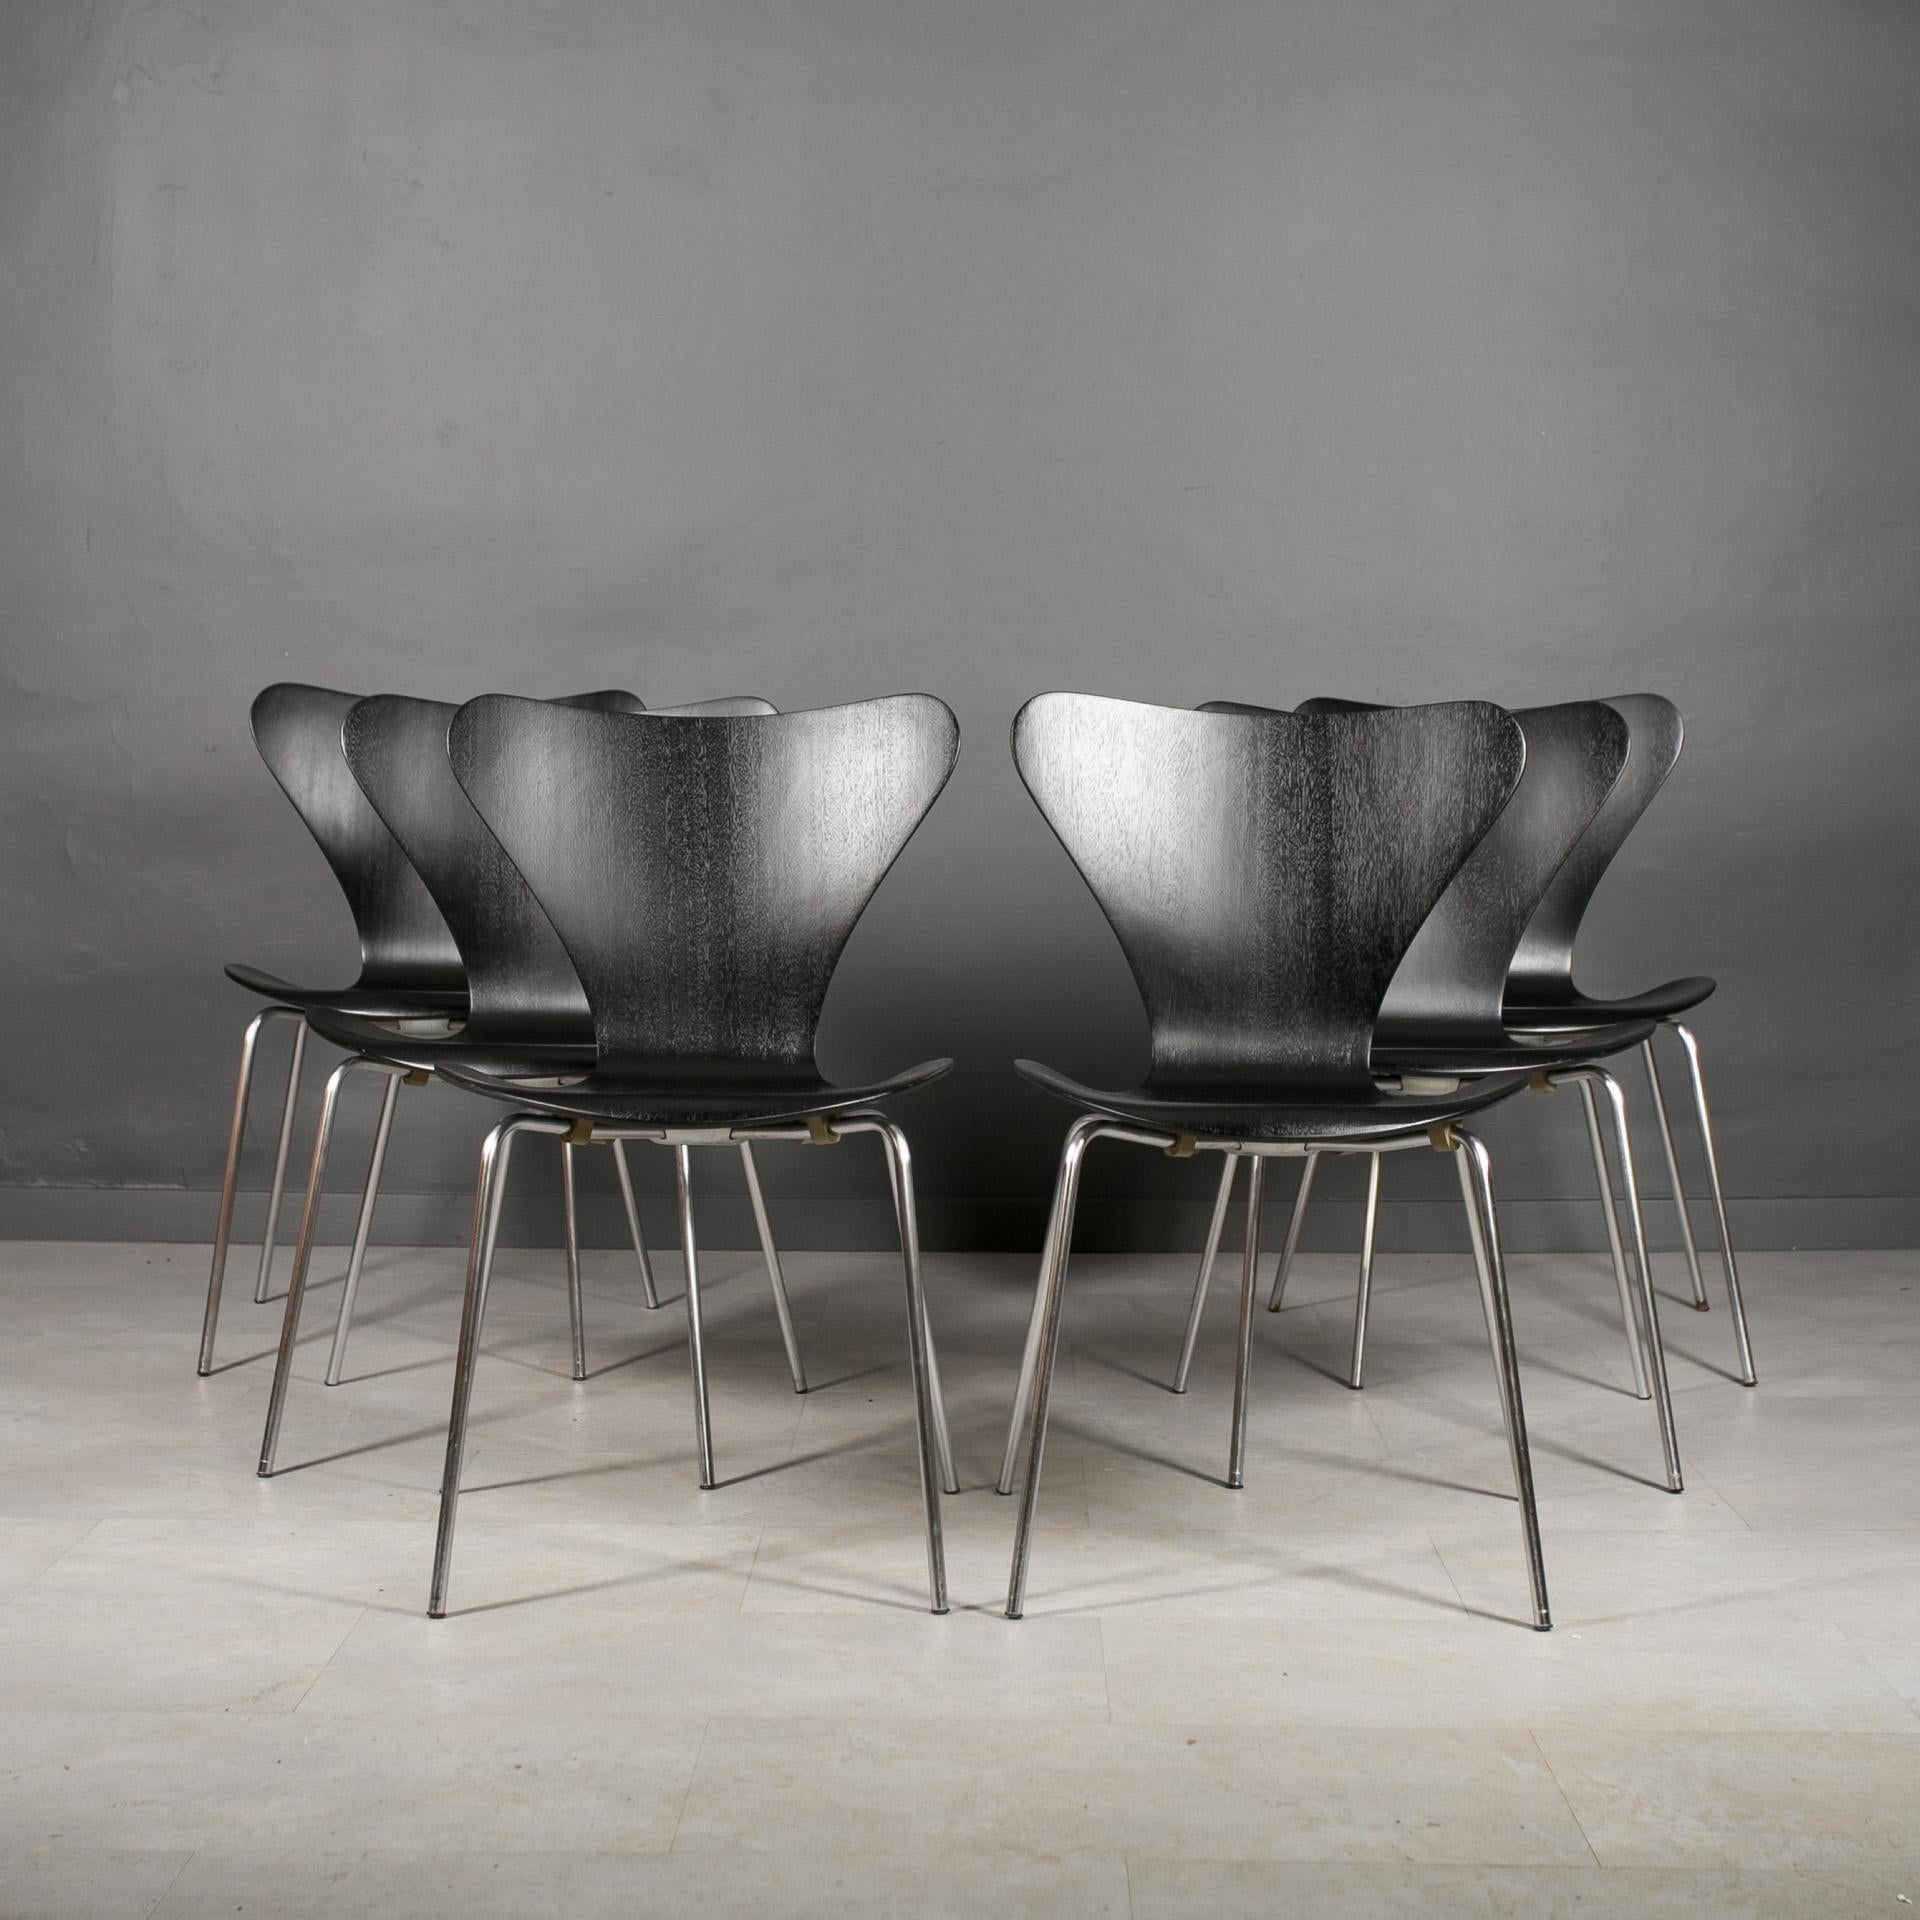 Elevate your space with the timeless elegance of the Fritz Hansen 3107 Chair, a masterpiece born from the creative genius of designer Arne Jacobsen in 1955. This iconic Series 7™ chair seamlessly blends form and function, making it a coveted